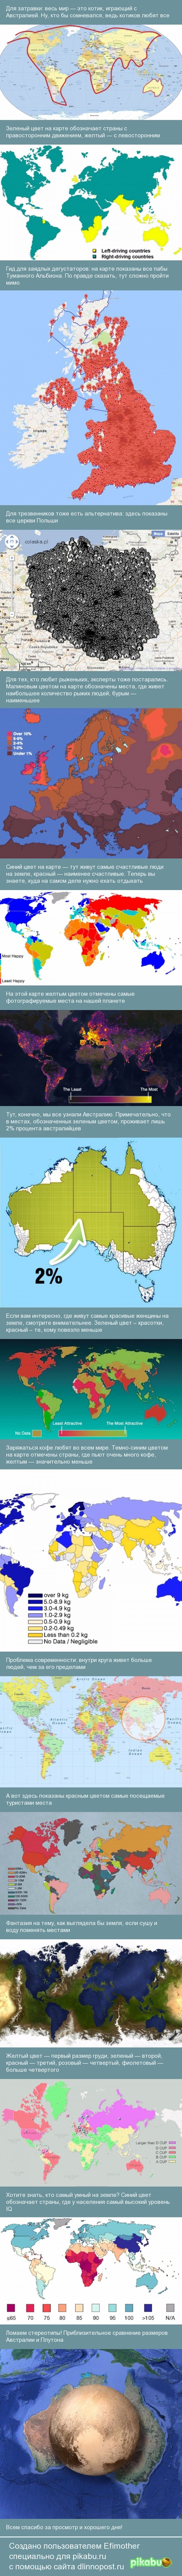 Fascinating geography. - Statistics, Longpost, Geography, Facts, From the network